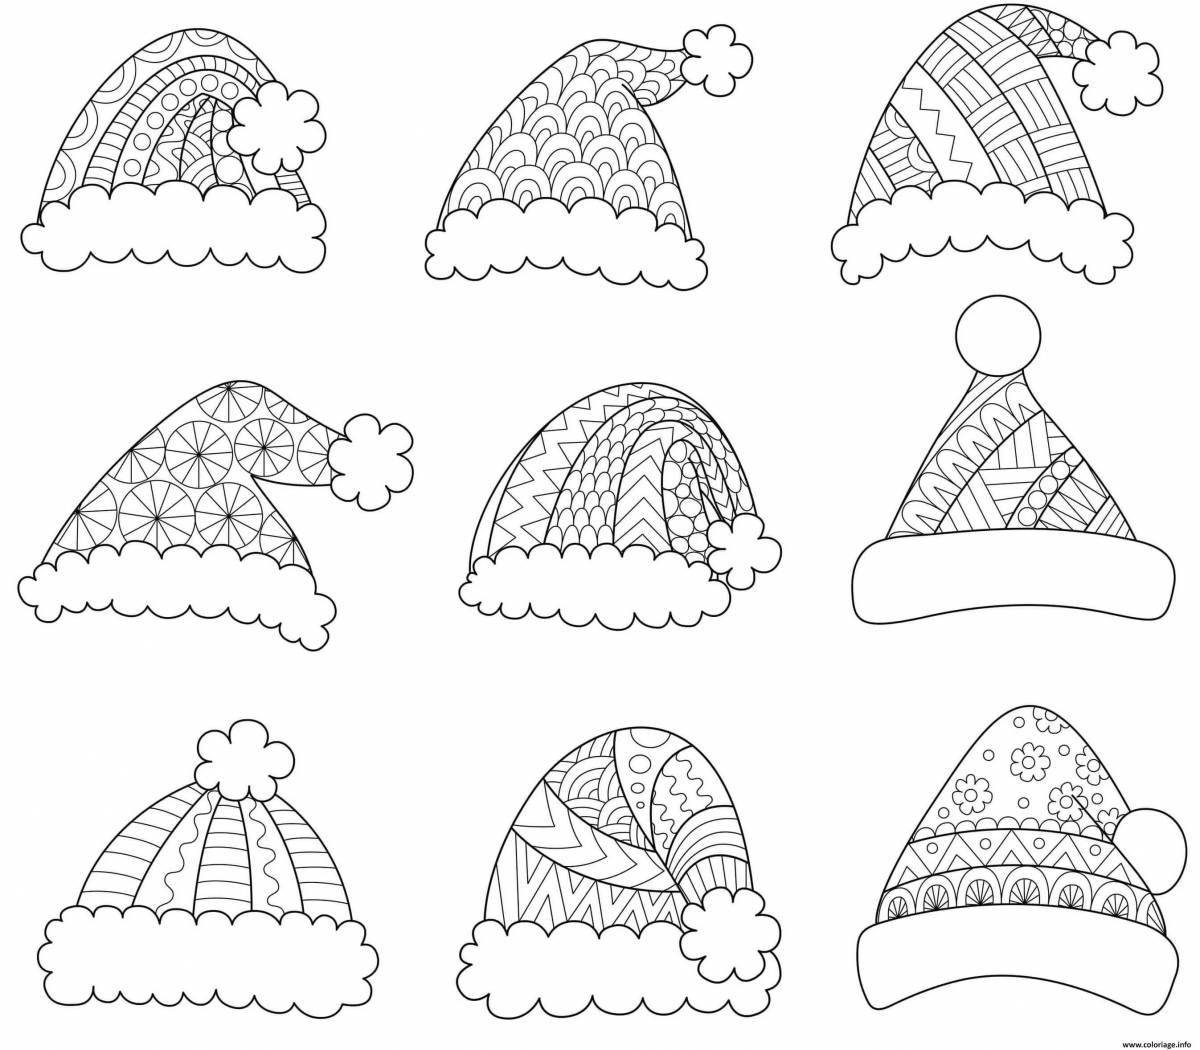 Coloring page shiny santa claus hat for kids